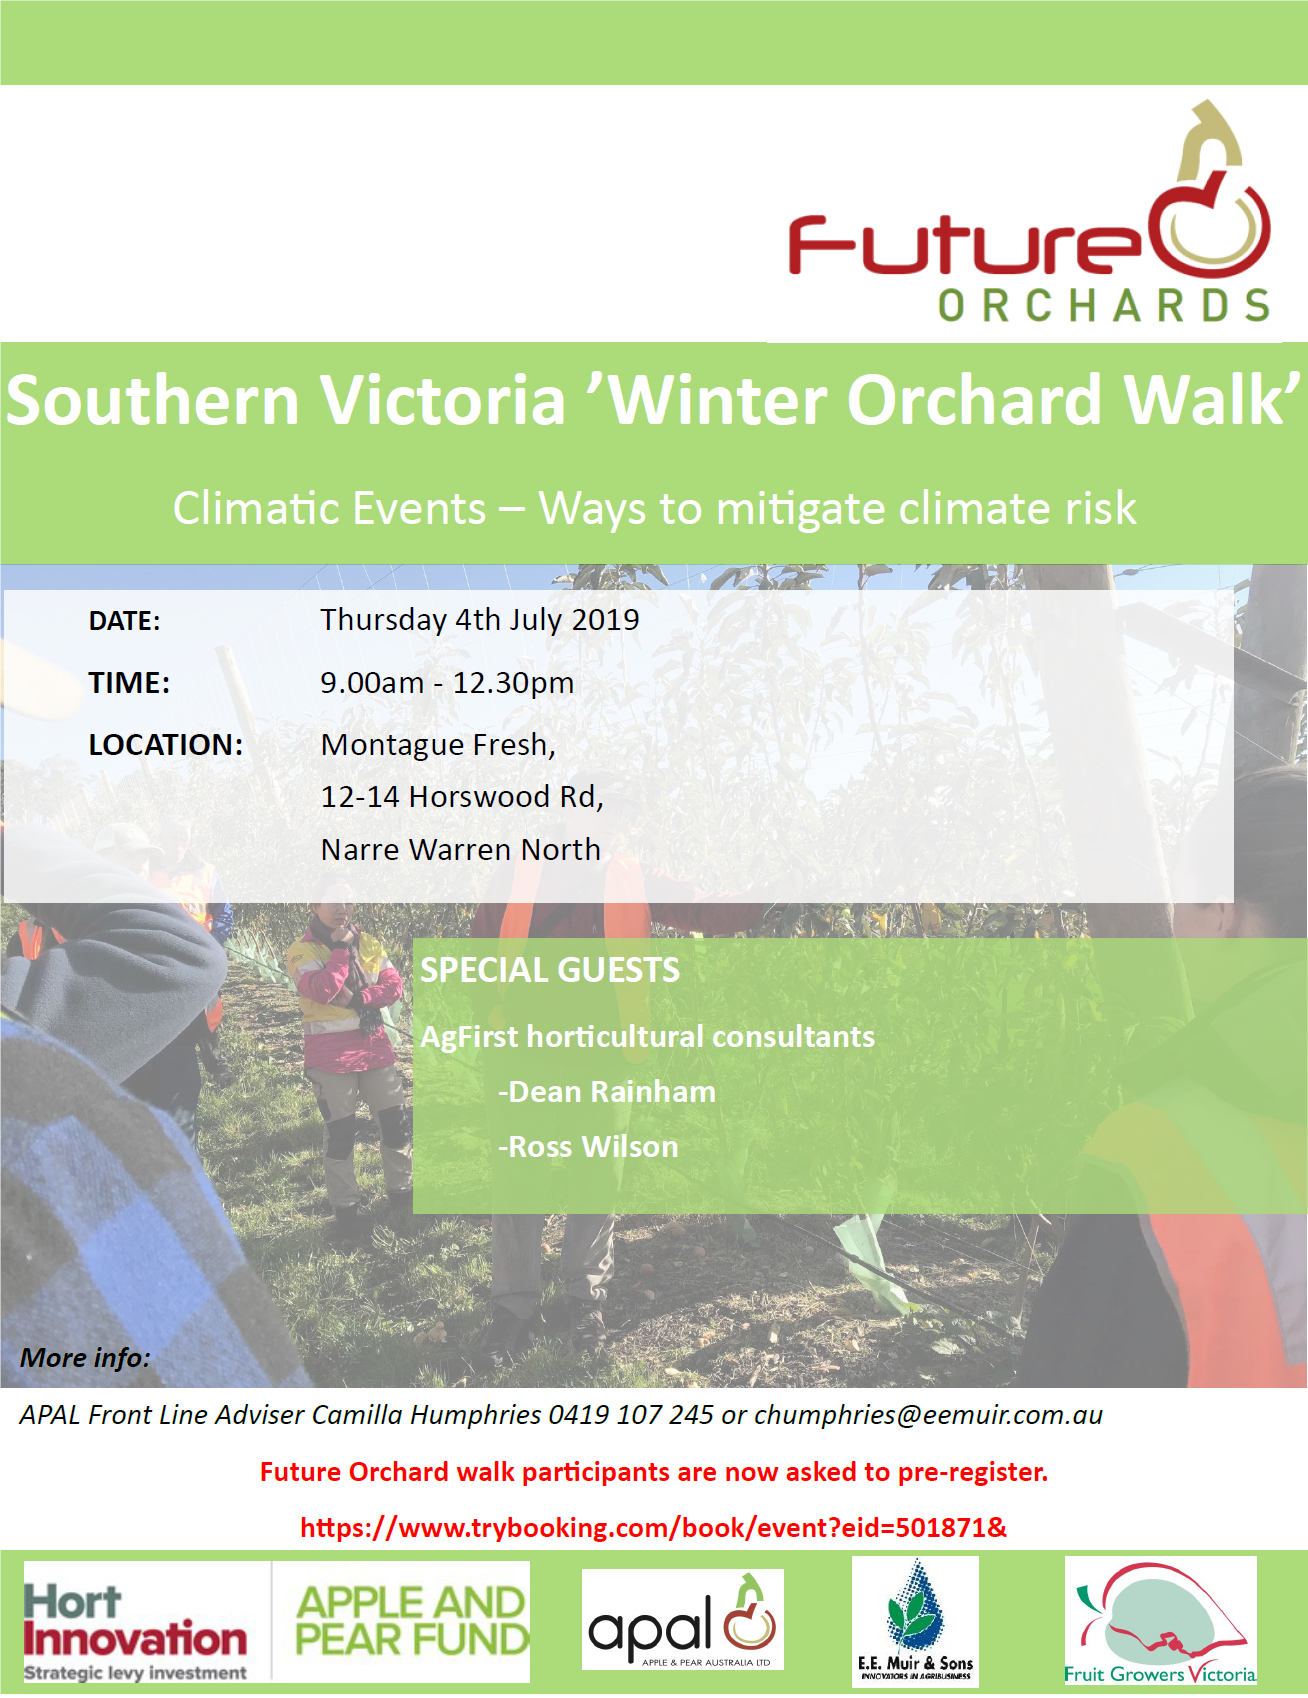 Southern Victoria Future Orchards 'Winter Orchard Walk'- Thursday 4th July 2019 from 9:00am-12:30pm